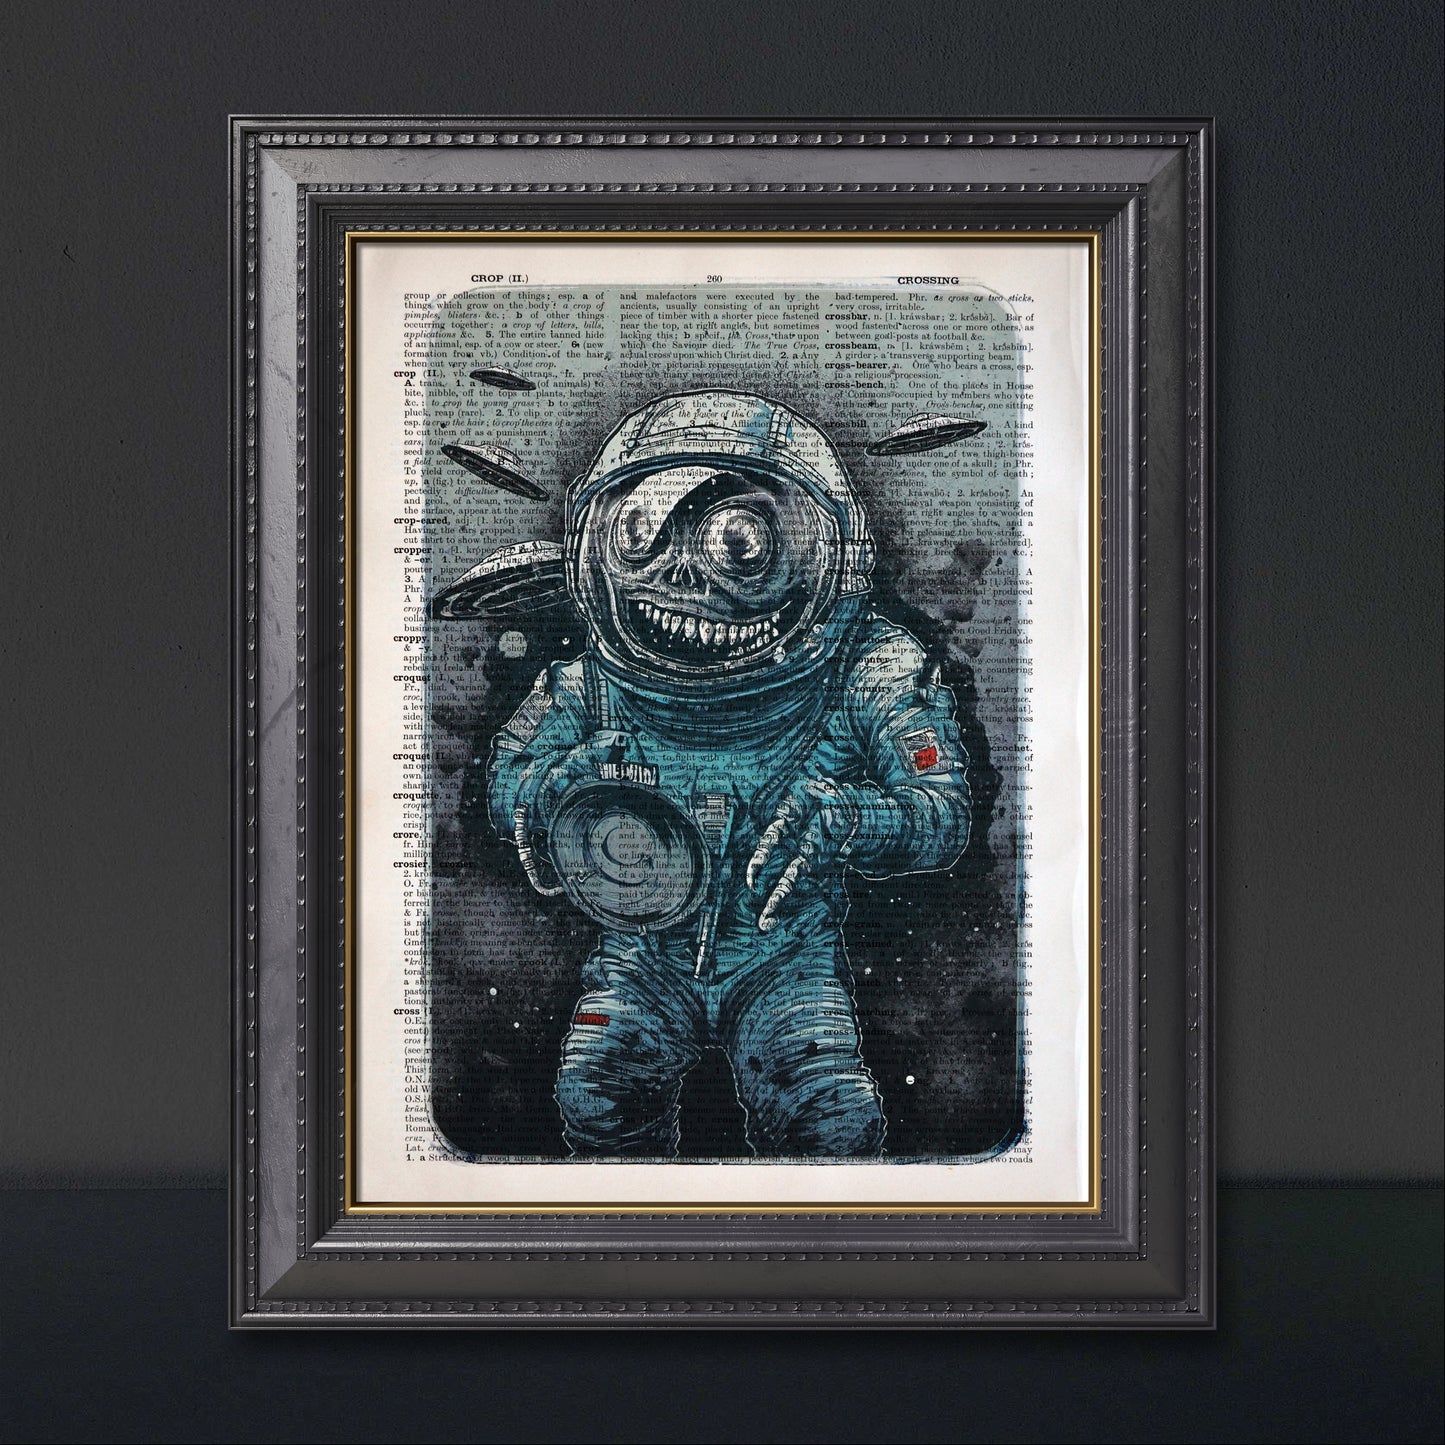 The "Cosmic Plague" artwork showcases a terrifying creature with flying saucers, crafted on an upcycled dictionary page.